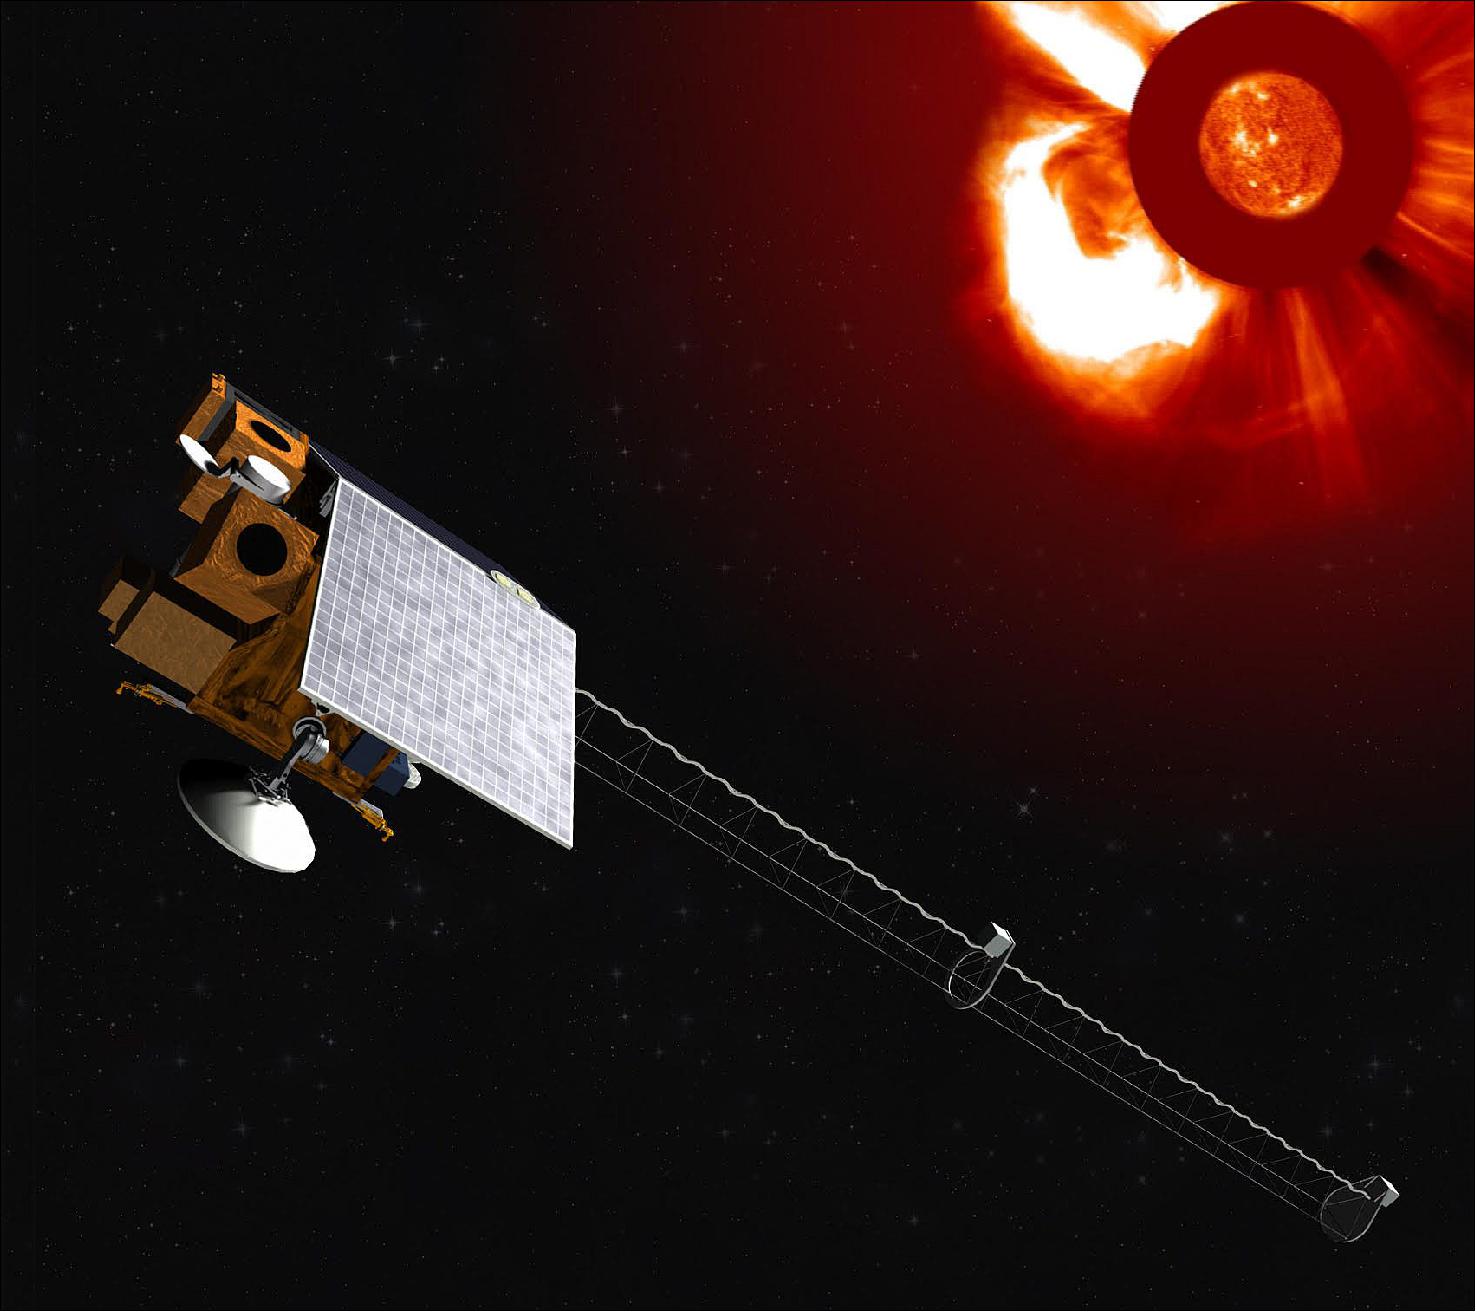 Figure 4: Artist's rendering of the SWFO-L1 spacecraft in orbit. The SWFO-L1 is designed to carry on work performed by NOAA’s Deep Space Climate Observatory (DSCOVR) launched in 2015 and the joint European Space Agency-NASA Solar and Heliophysics Observatory launched in 1995 (image credit: NOAA)